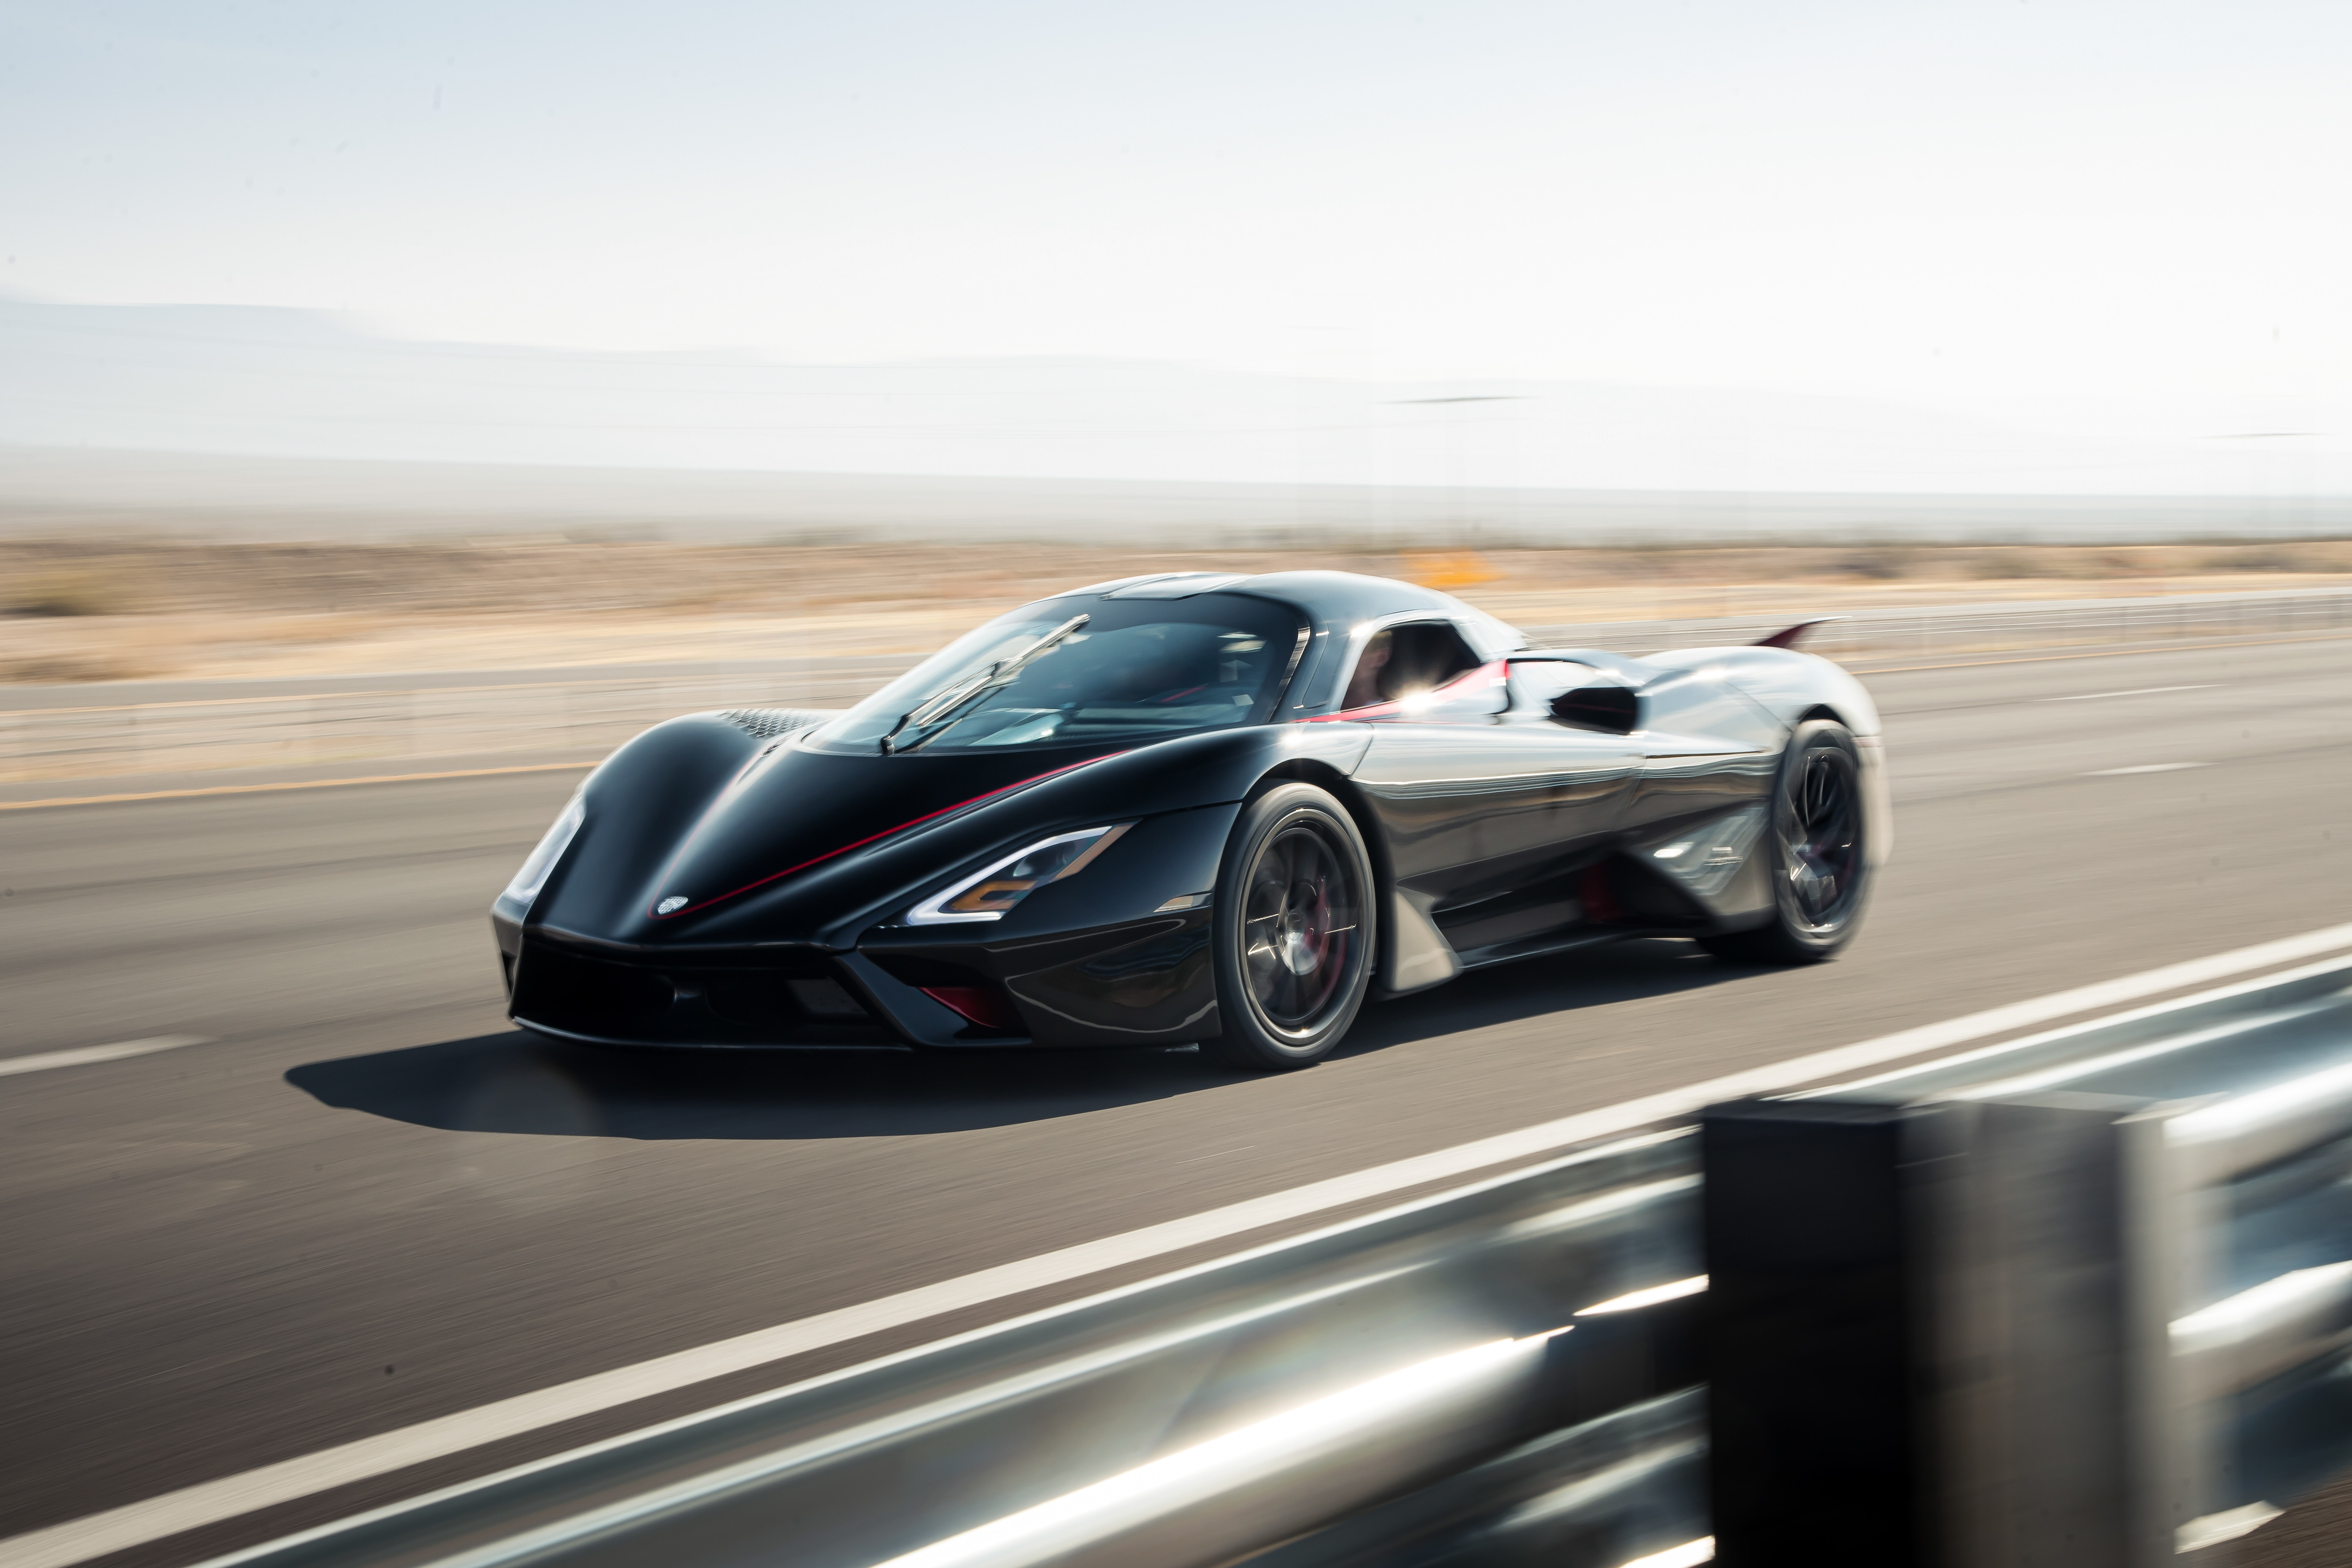 Watch: At 508 kmph, this is now the world's fastest production car